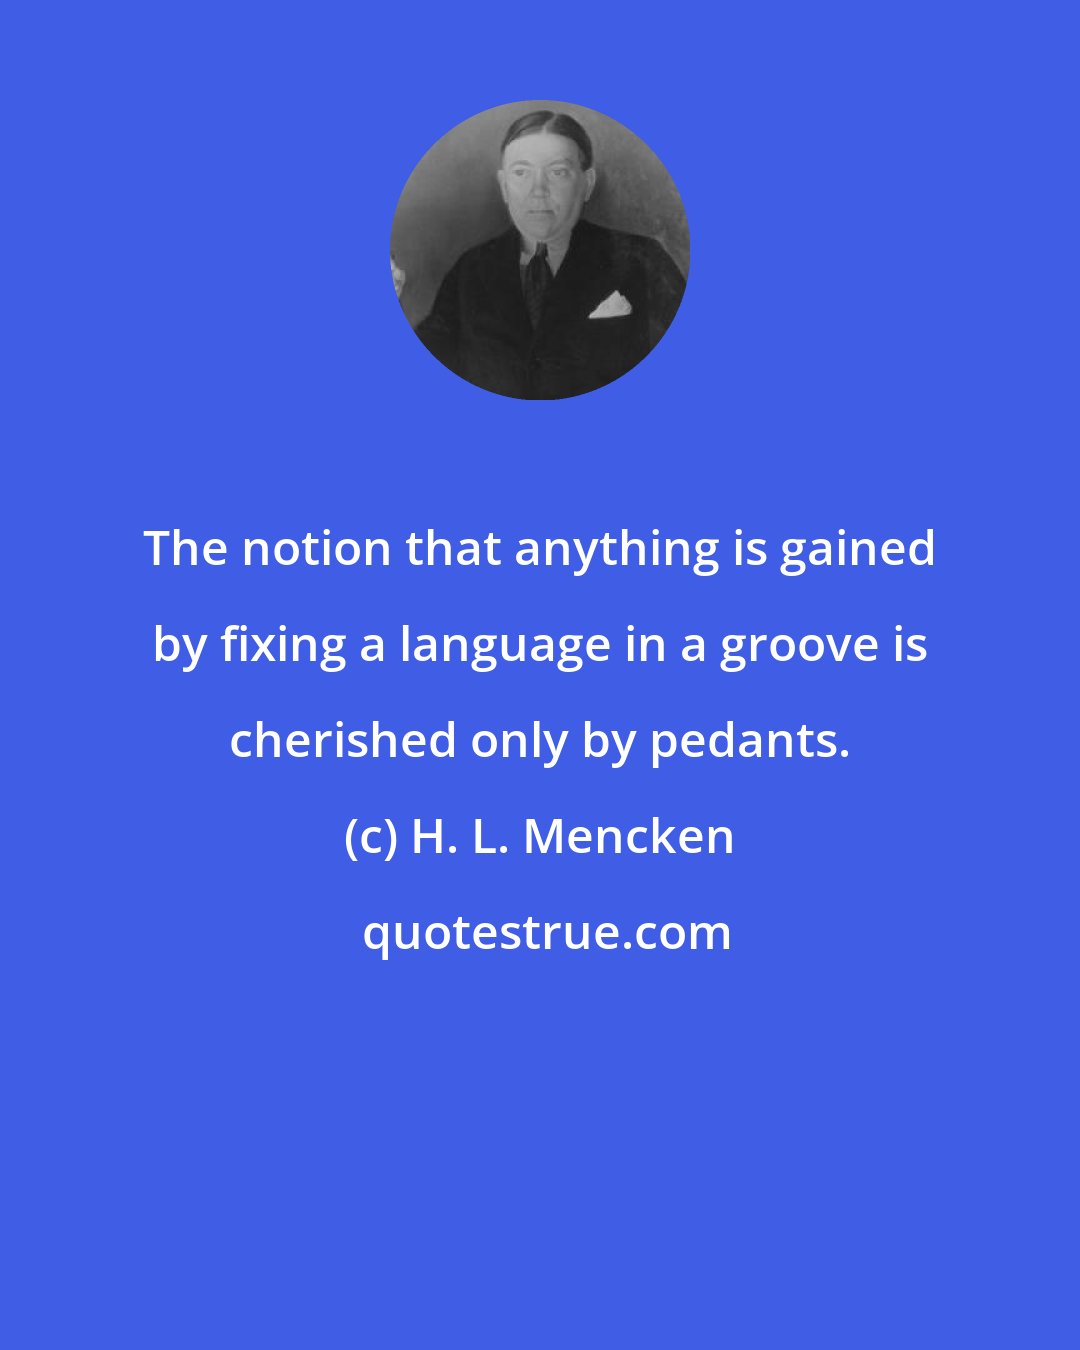 H. L. Mencken: The notion that anything is gained by fixing a language in a groove is cherished only by pedants.